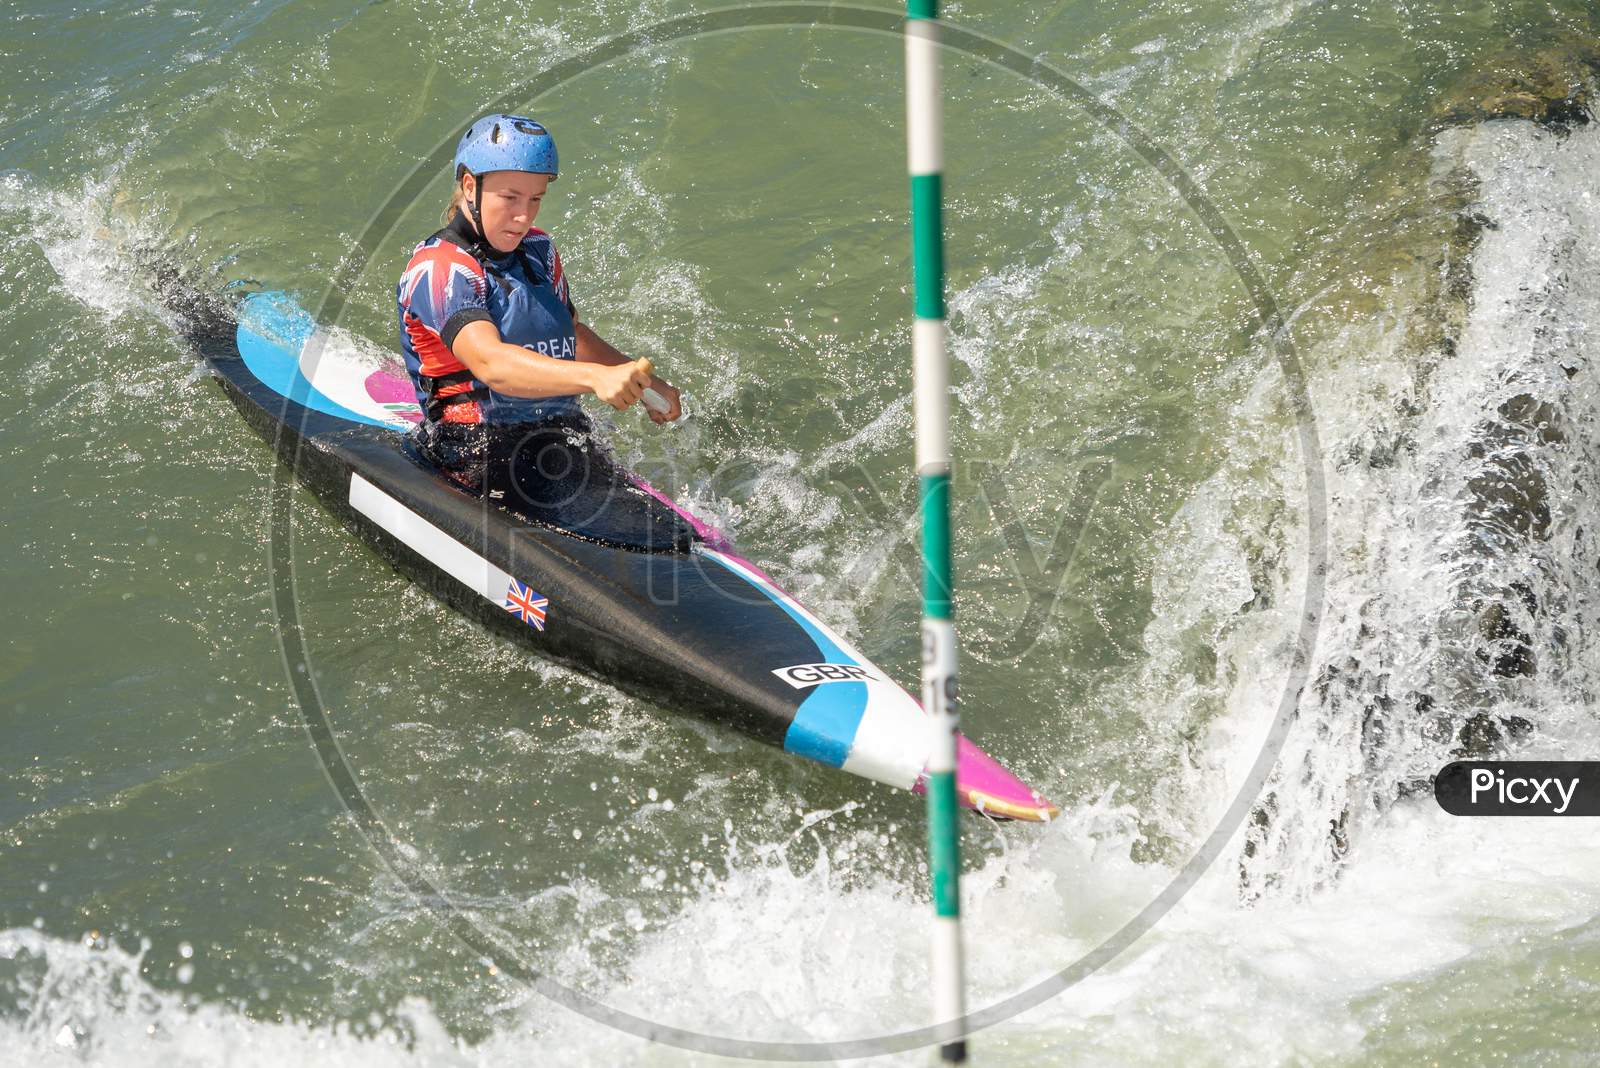 Canoe Slalom Athlete Approaches A Slalom Gate At The Bottom Of A Large Drop